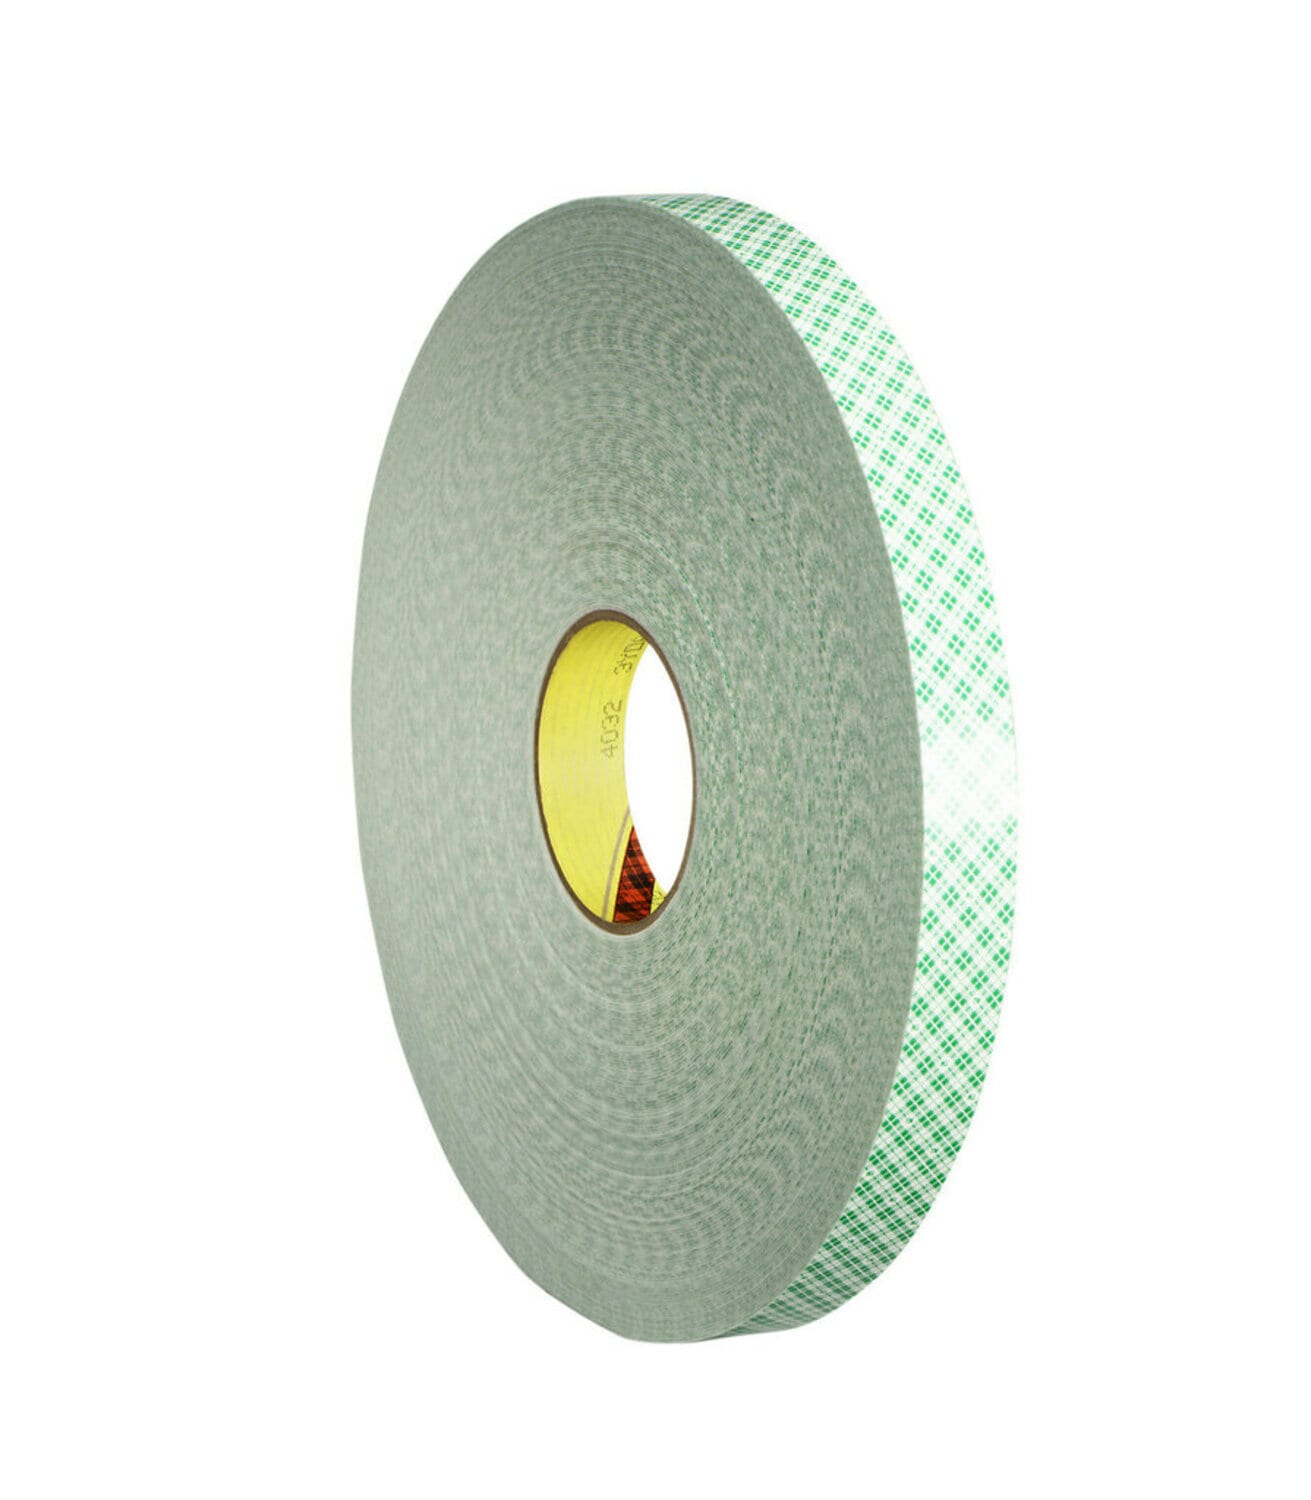 7010302016 - 3M Double Coated Urethane Foam Tape 4032, Off White, 9 in x 72 yd, 31
mil, 1 Roll/Case